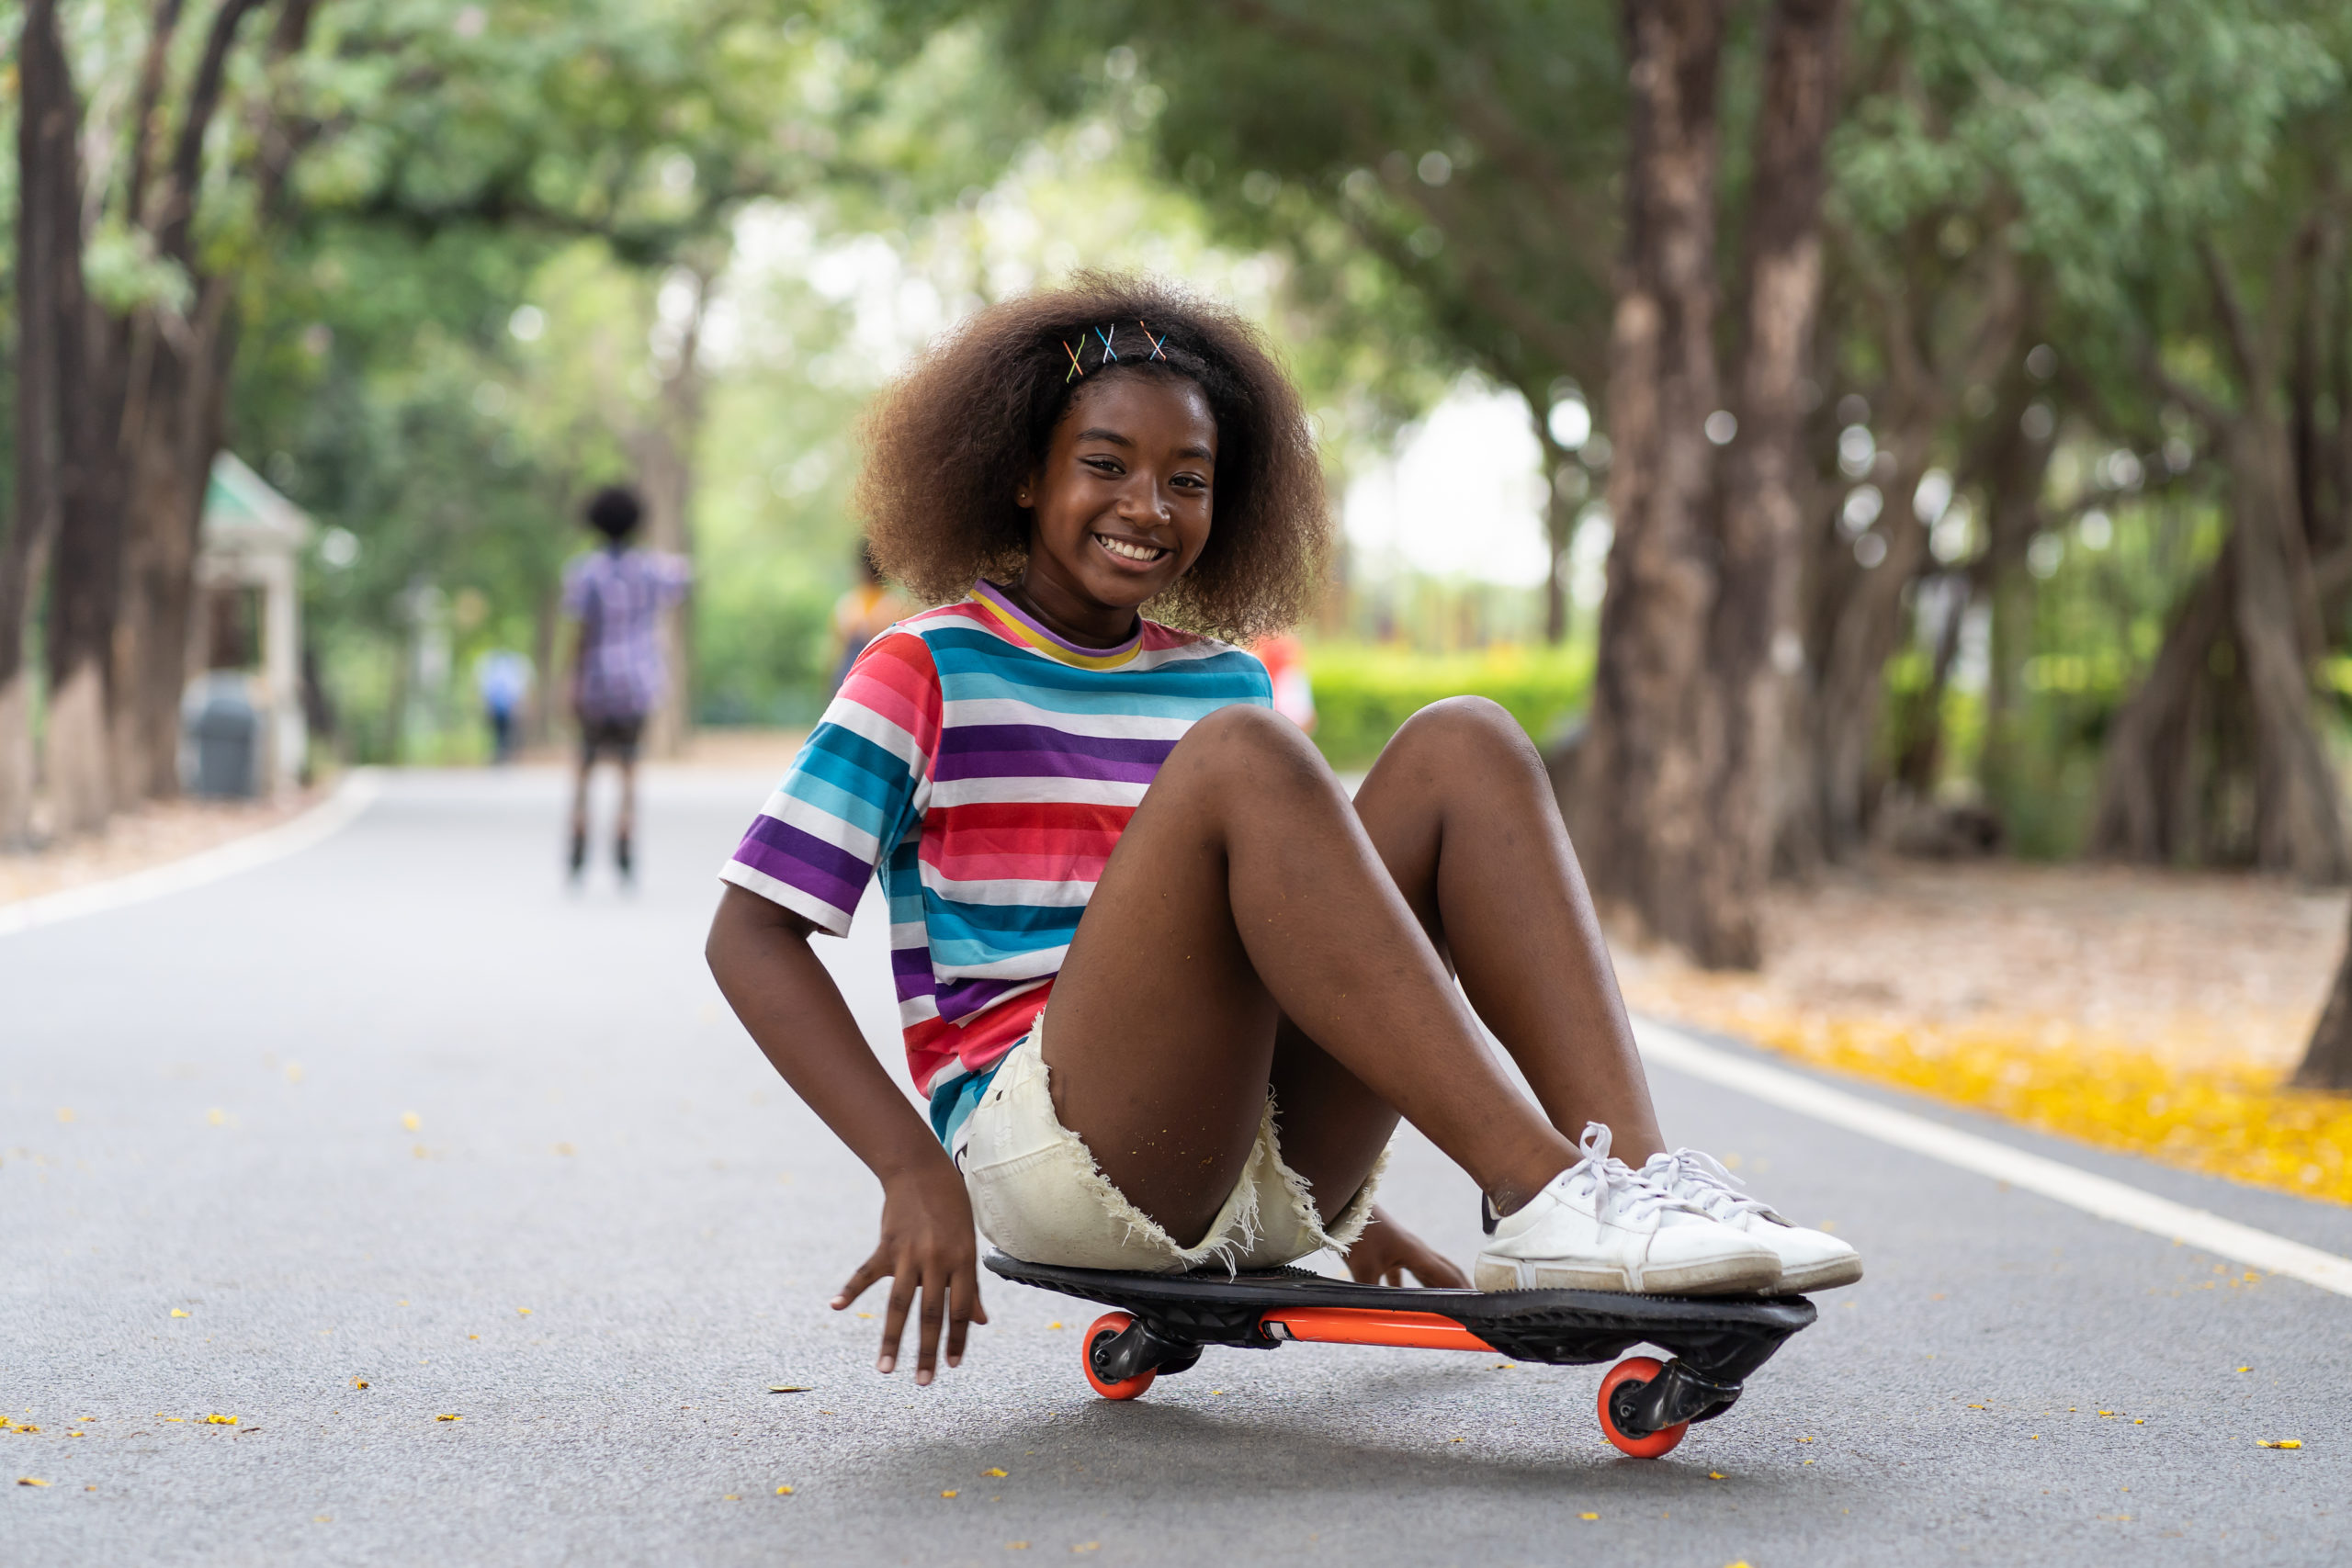 Happy young girl playing on the skateboard in the park. African American girl with curly hair practicing skateboard